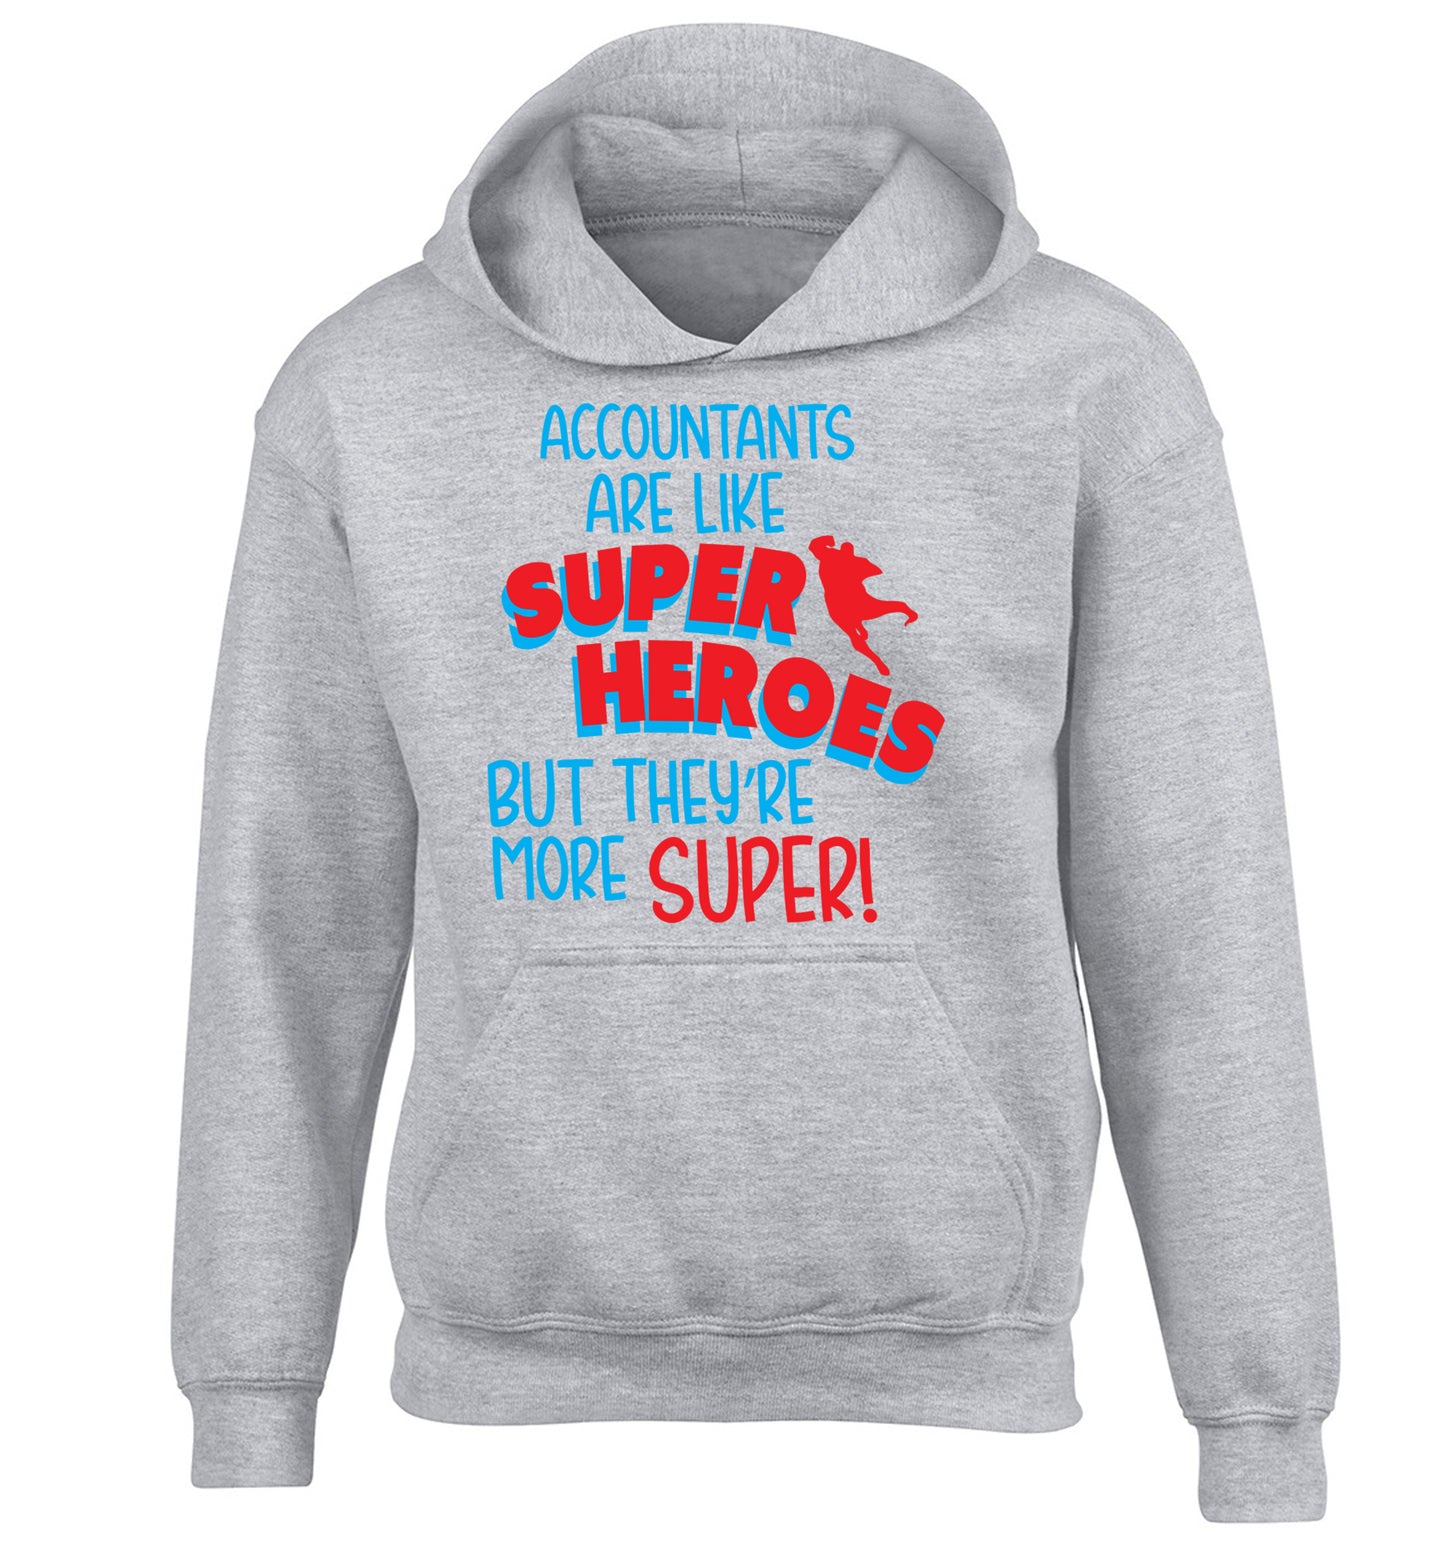 Accountants are like superheroes but they're more super children's grey hoodie 12-13 Years